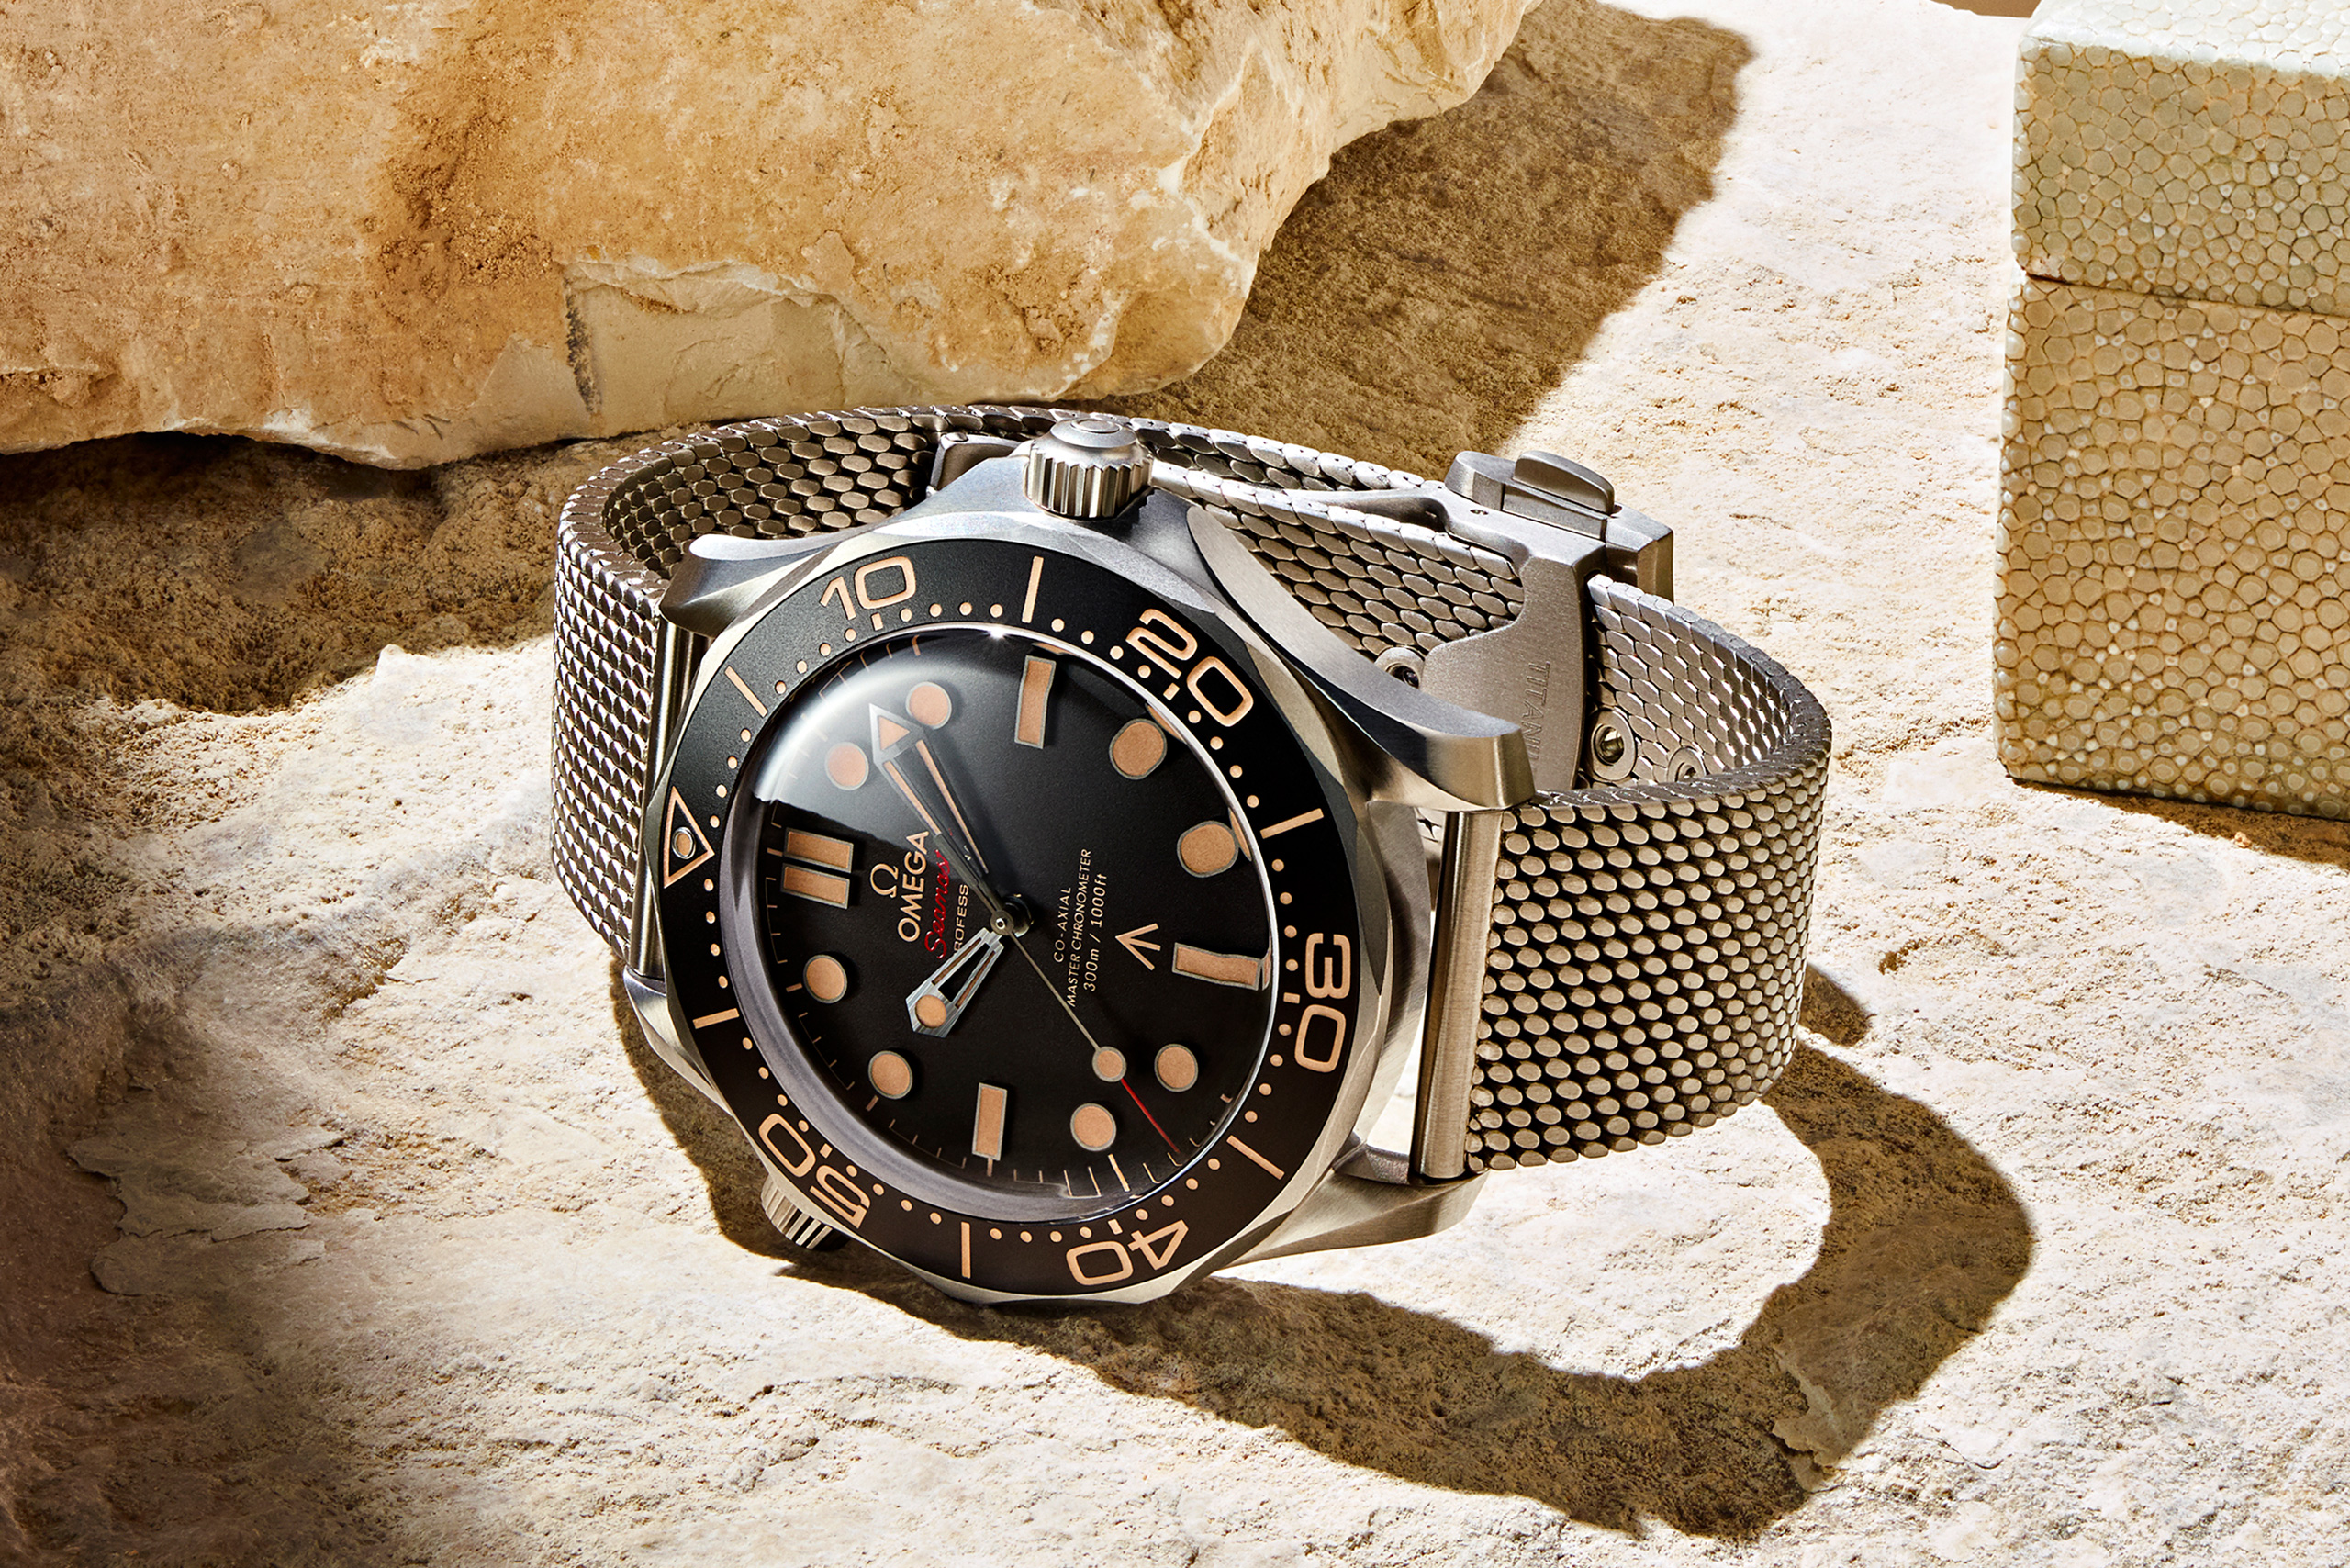 No Time to Die: James Bond's Omega Seamaster Diver 300M "007 Edition